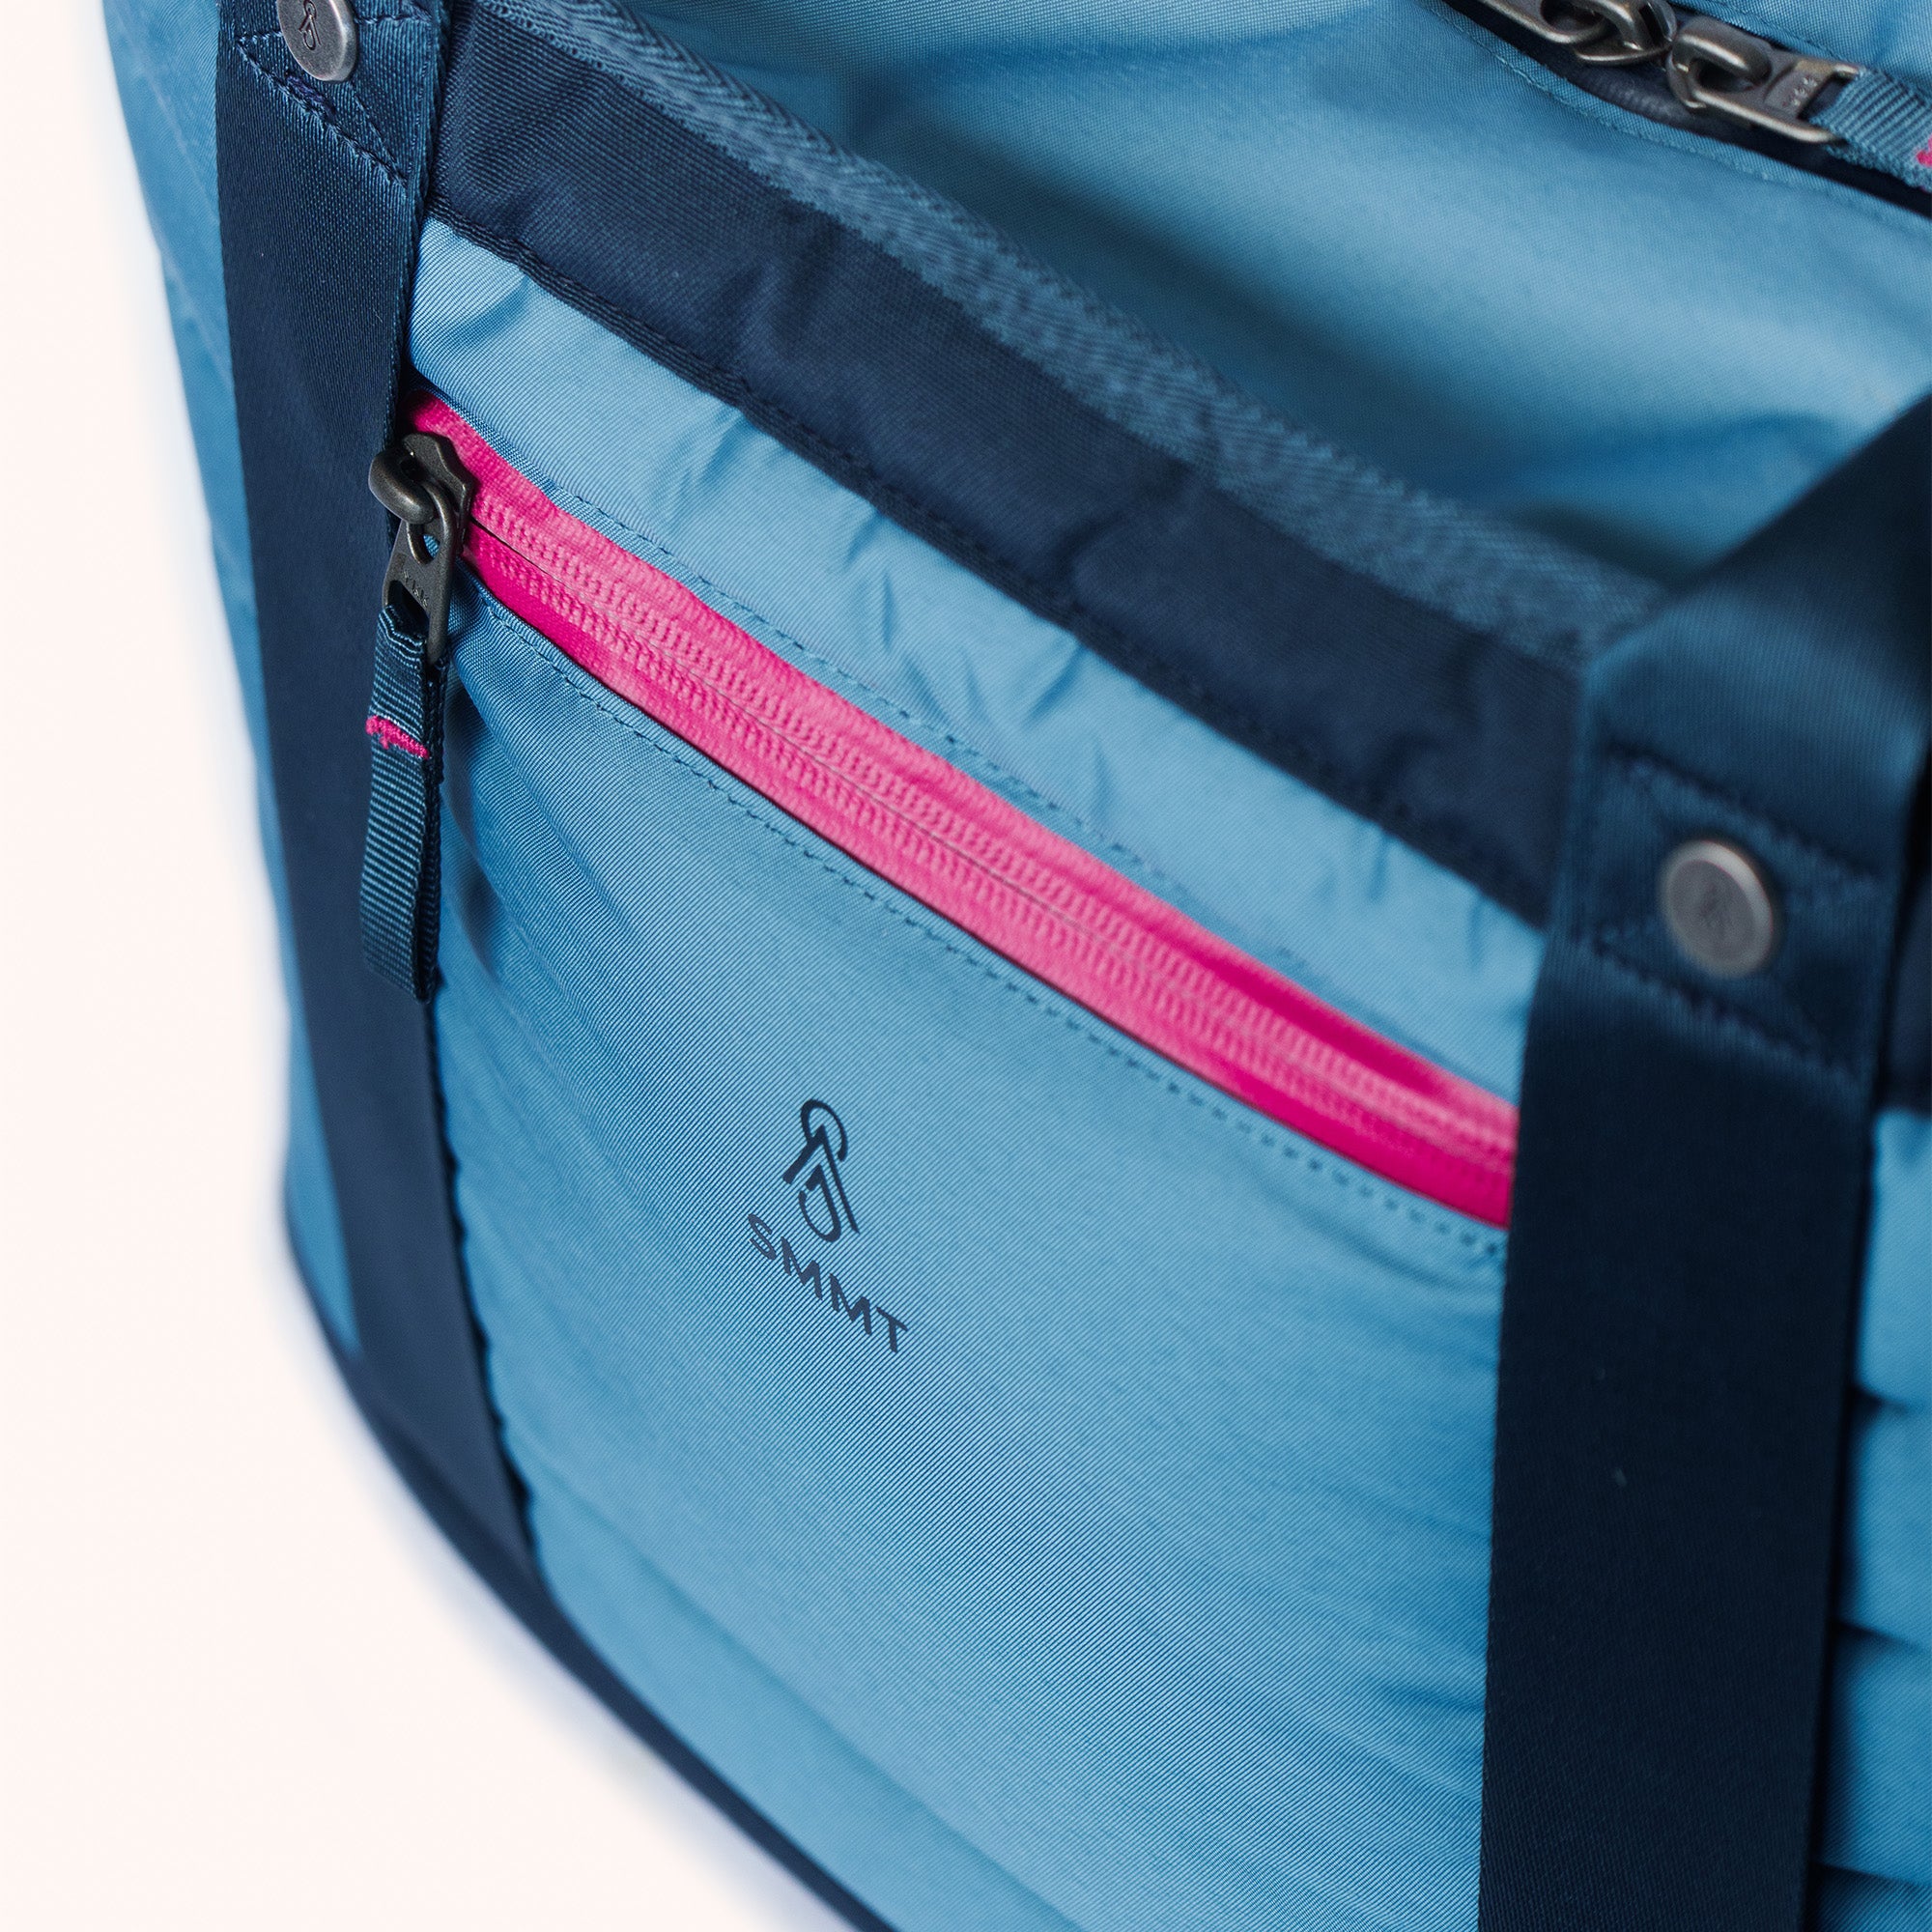 pink zipper and logo detail on front of smmt tote bag